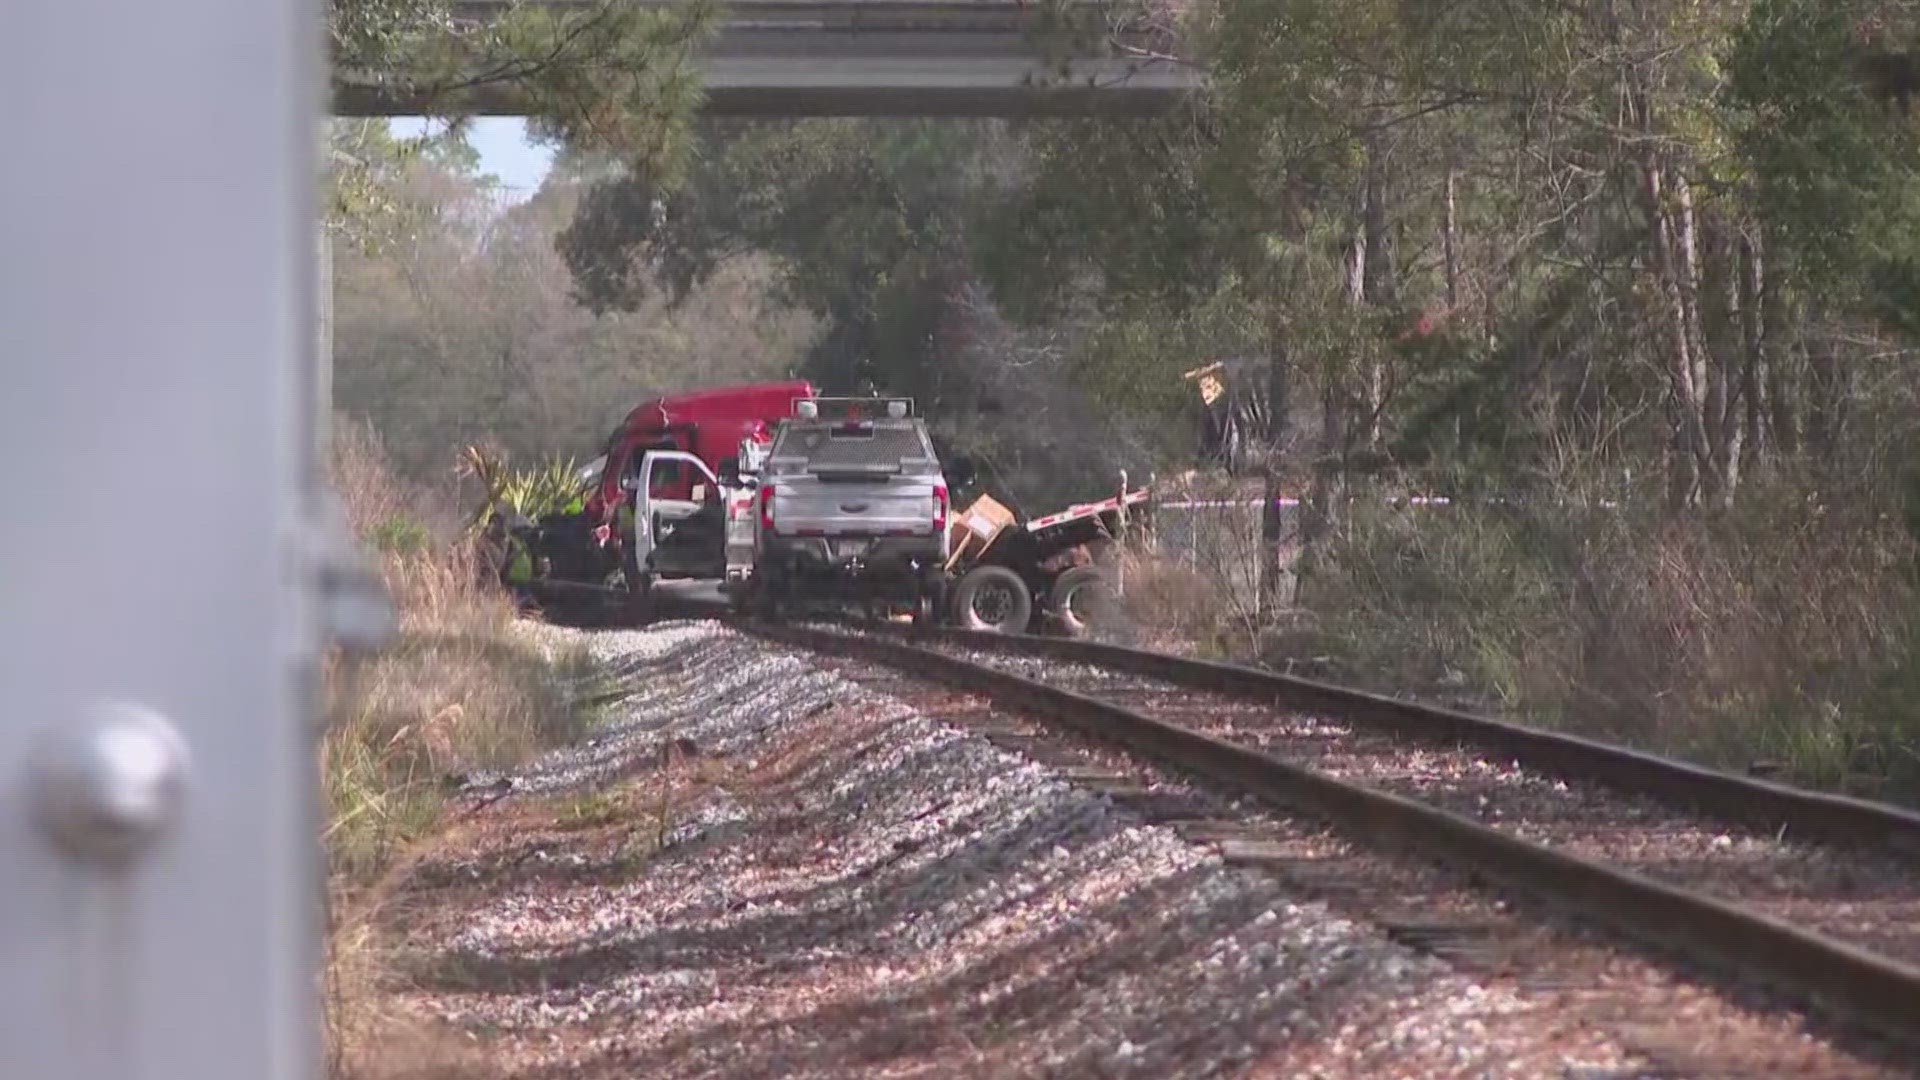 A 61-year-old Texas man was killed in the crash, according to FHP.